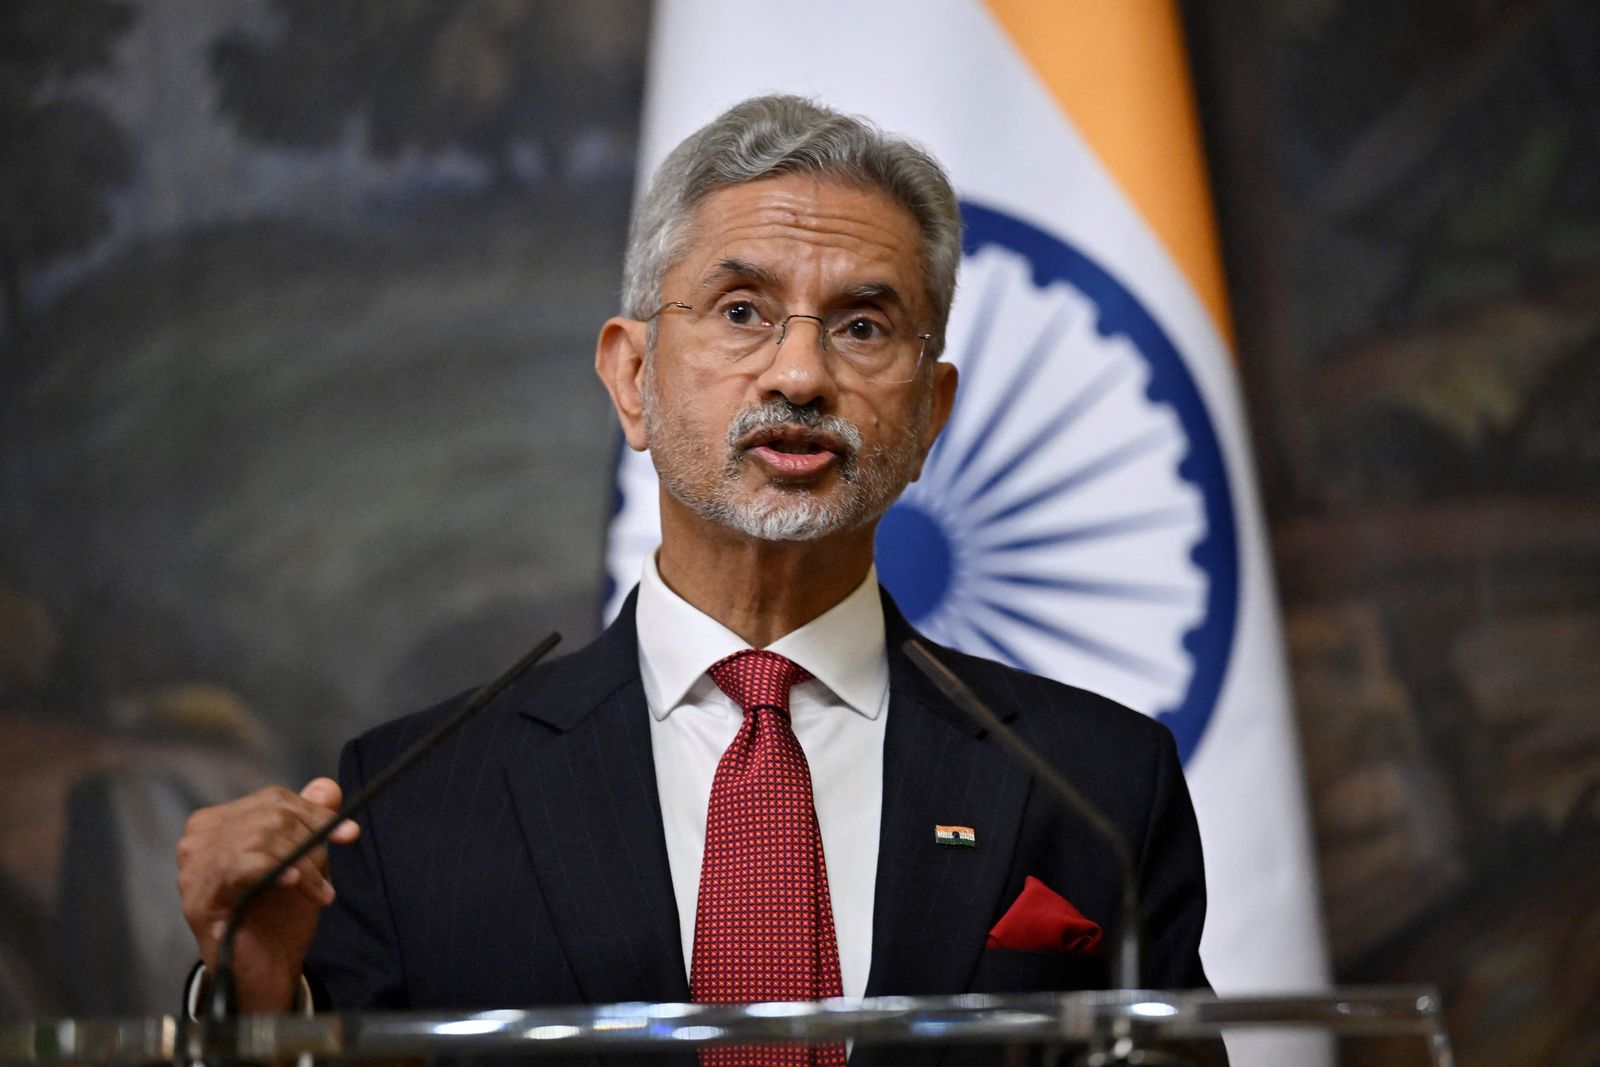 India's Foreign Minister Subrahmanyam Jaishankar speaks during a joint press conference with his Russian counterpart following their talks in Moscow on December 27, 2023. (Photo by Alexander NEMENOV / POOL / AFP)